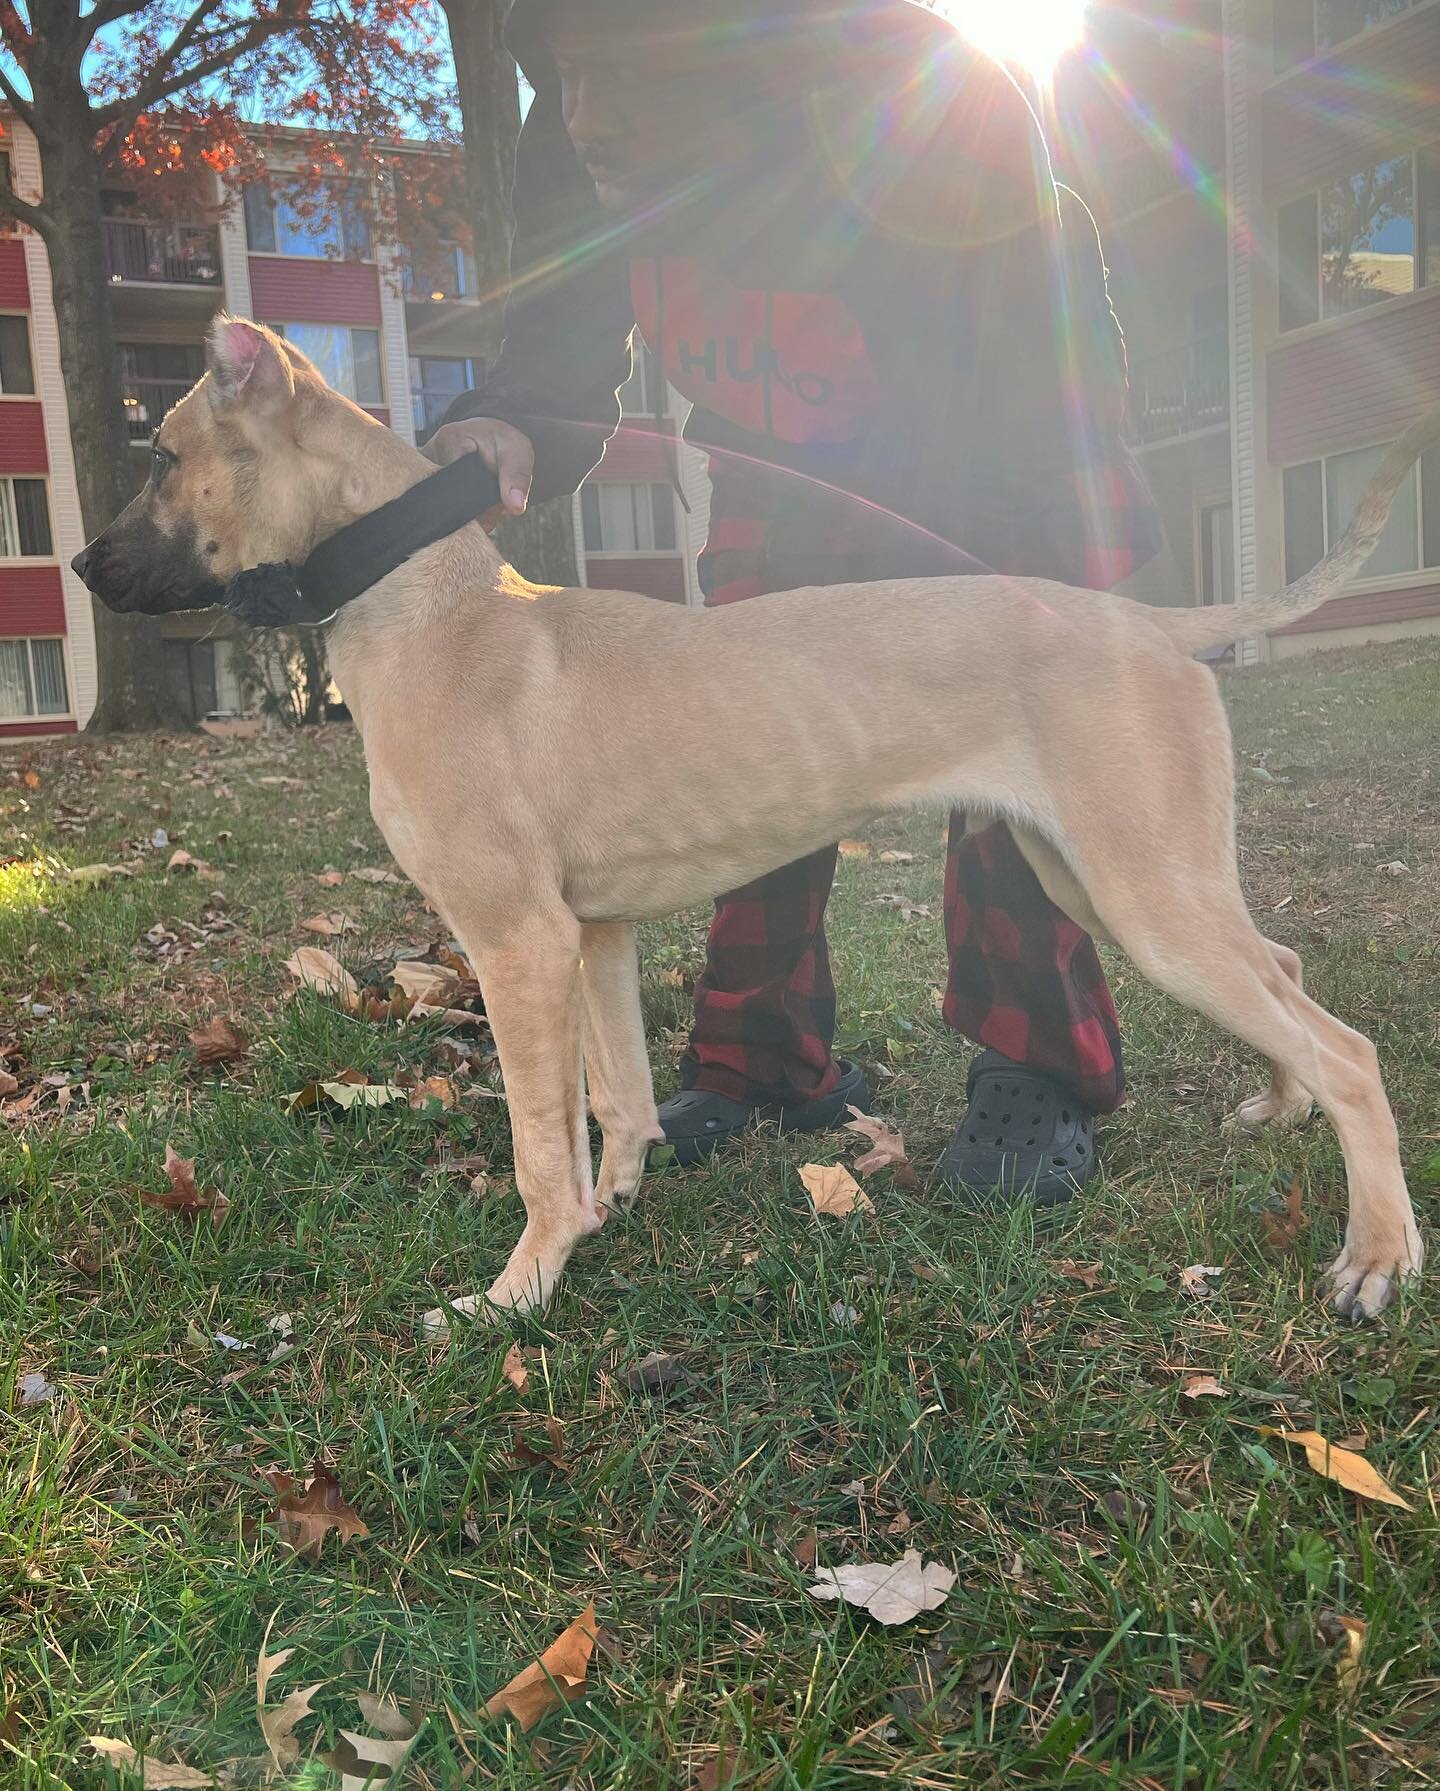 Savant&rsquo;s Menace 
(Stronghold&rsquo;s Nero x Savant&rsquo;s Amina) at 5.5mo.
.
You lose more by not trying than by trying.
We gon be alright.
.
.
.
We Breed Better. SavantK9
.
.
.
#savantalaunt #savantk9